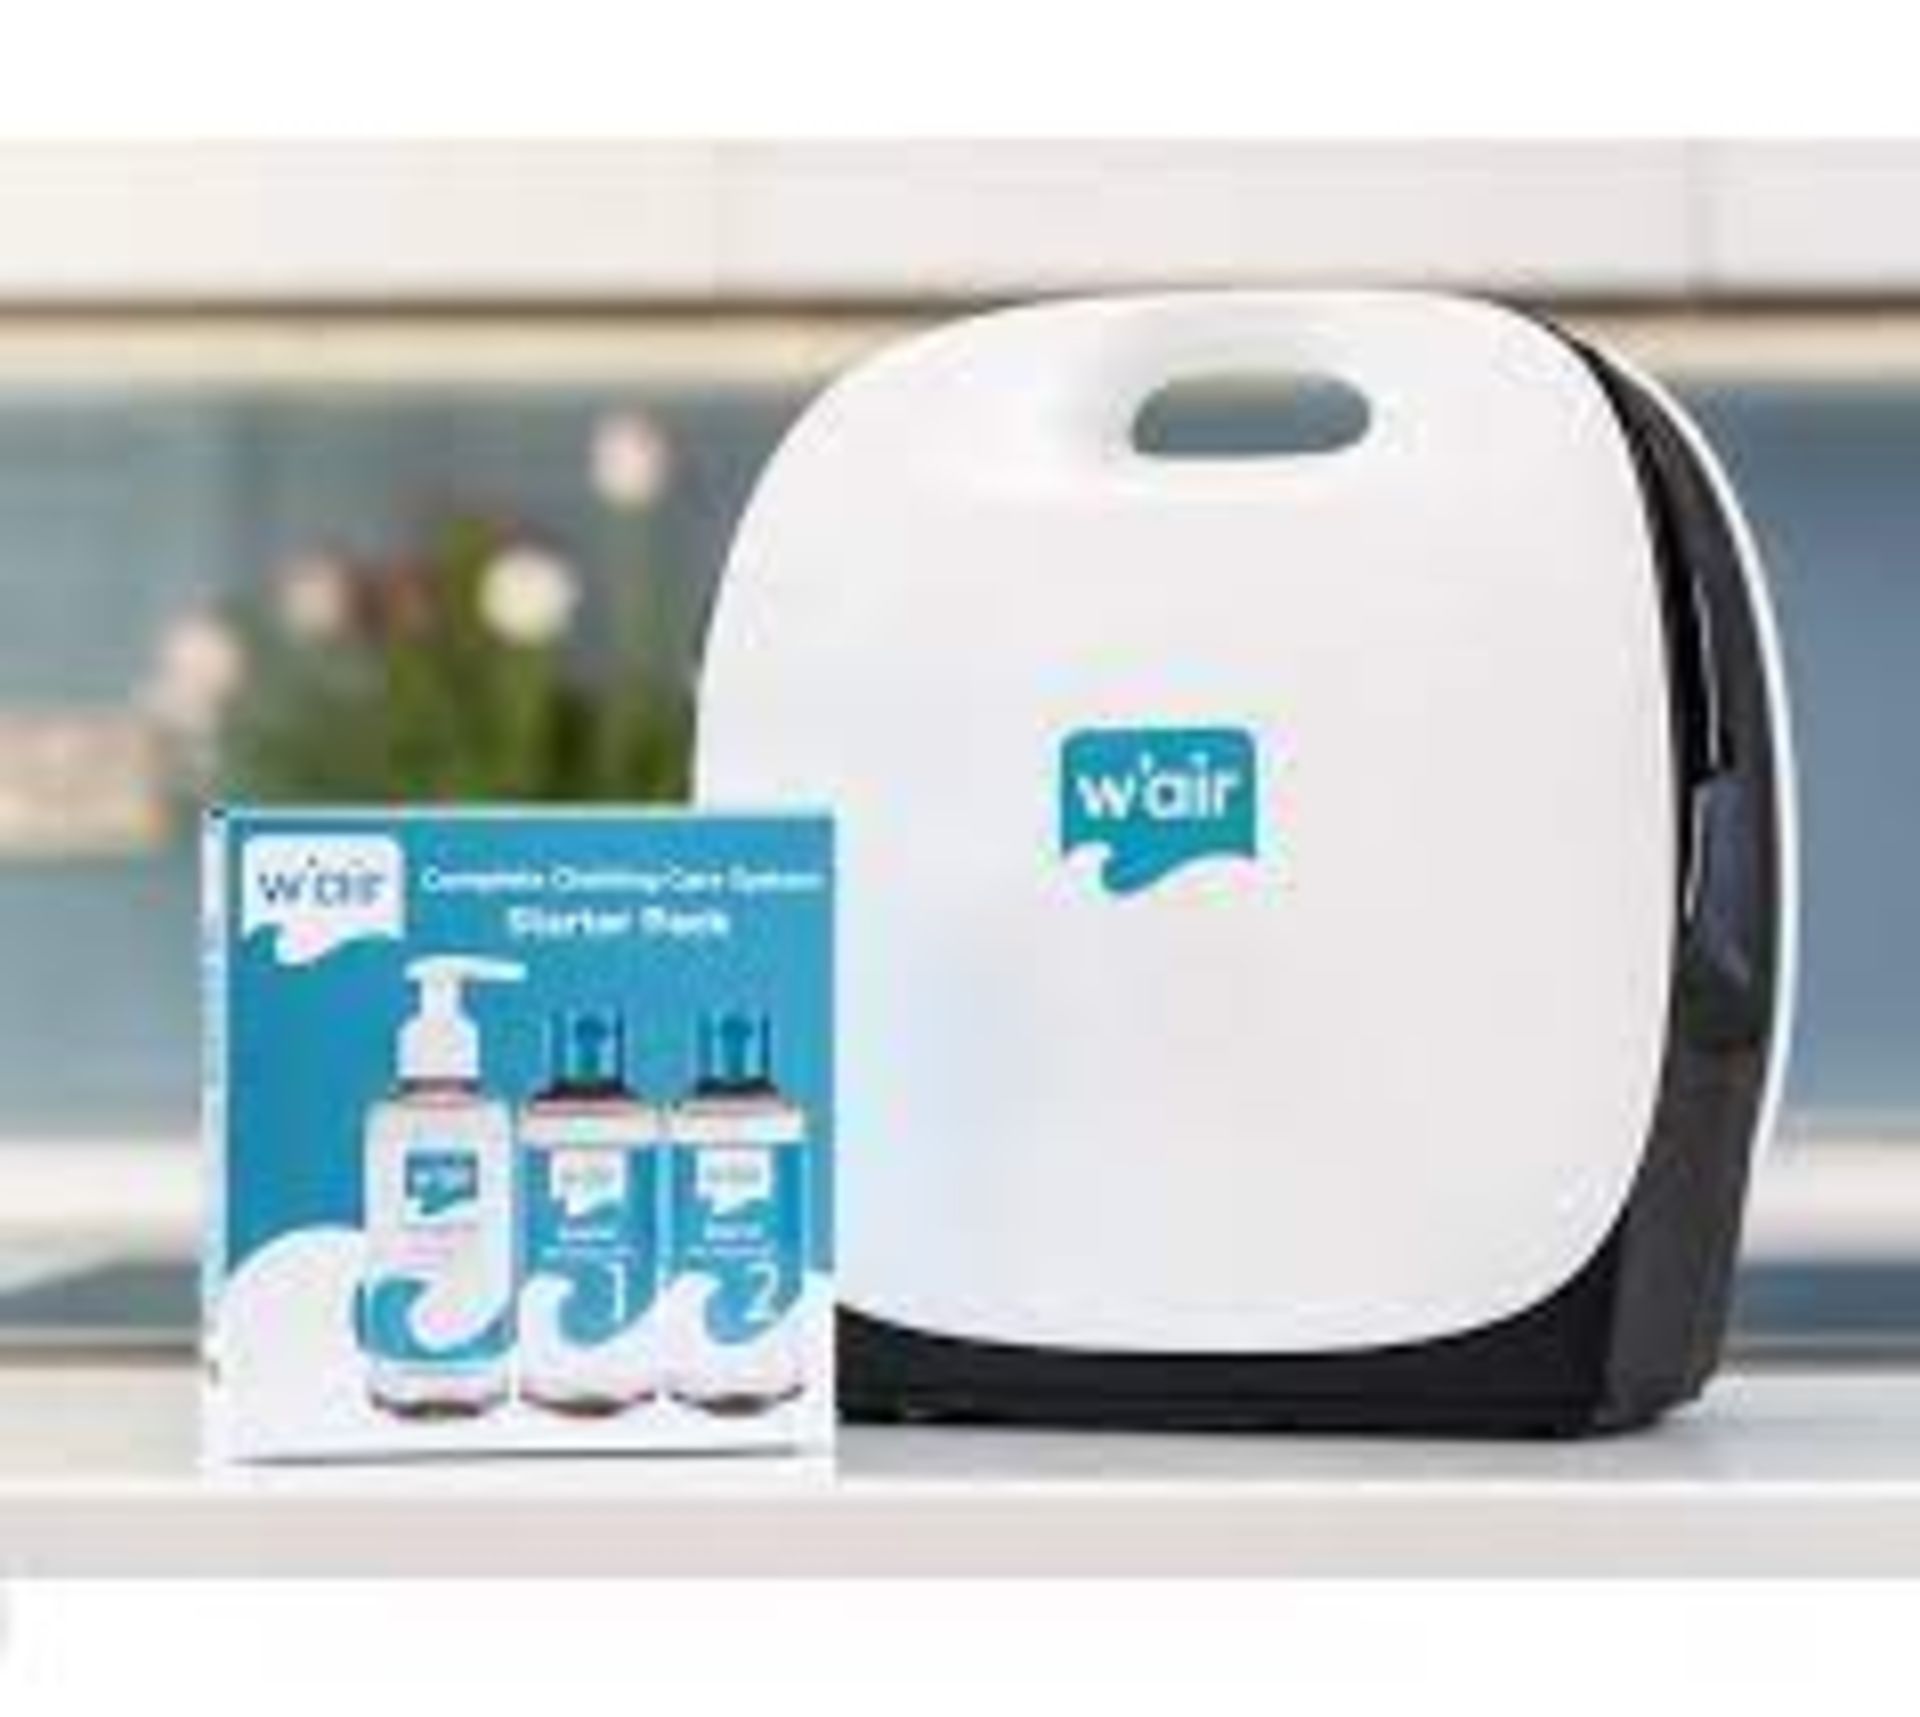 20 X BRAND NEW W'AIR SNEAKER CLEANING SYSTEMS RRP £299, The w'air uses hydrodynamic technology - Bild 5 aus 6